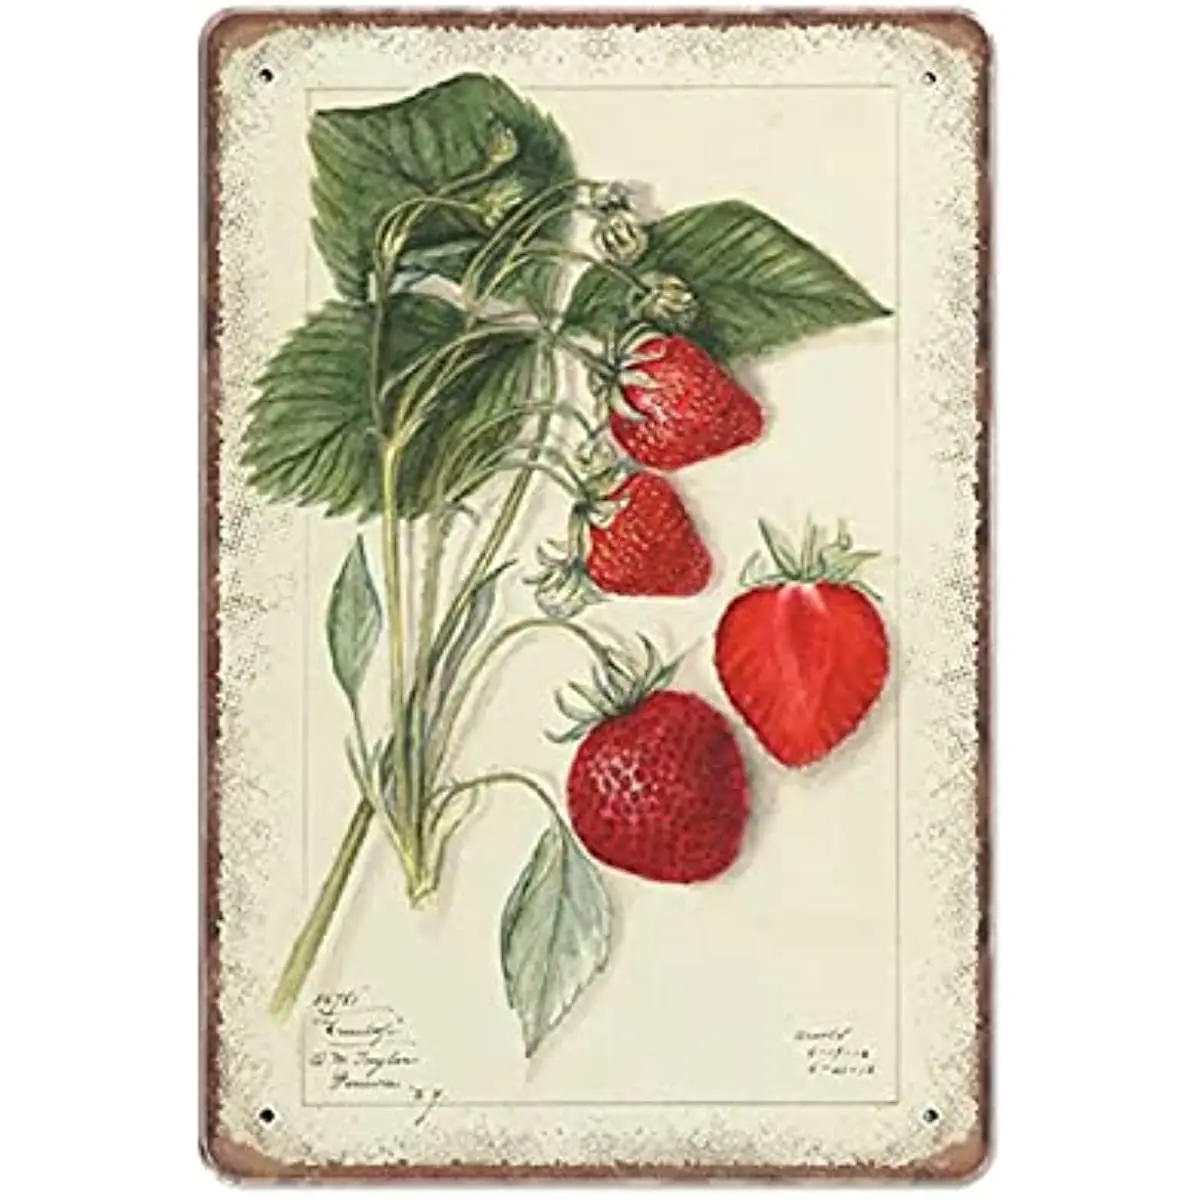 

New Metal Tin Sign Vintage Strawberry Botanical Mary Daisy Arnold Restarant Antique Theme Plaqu Mm for Home, Living Room